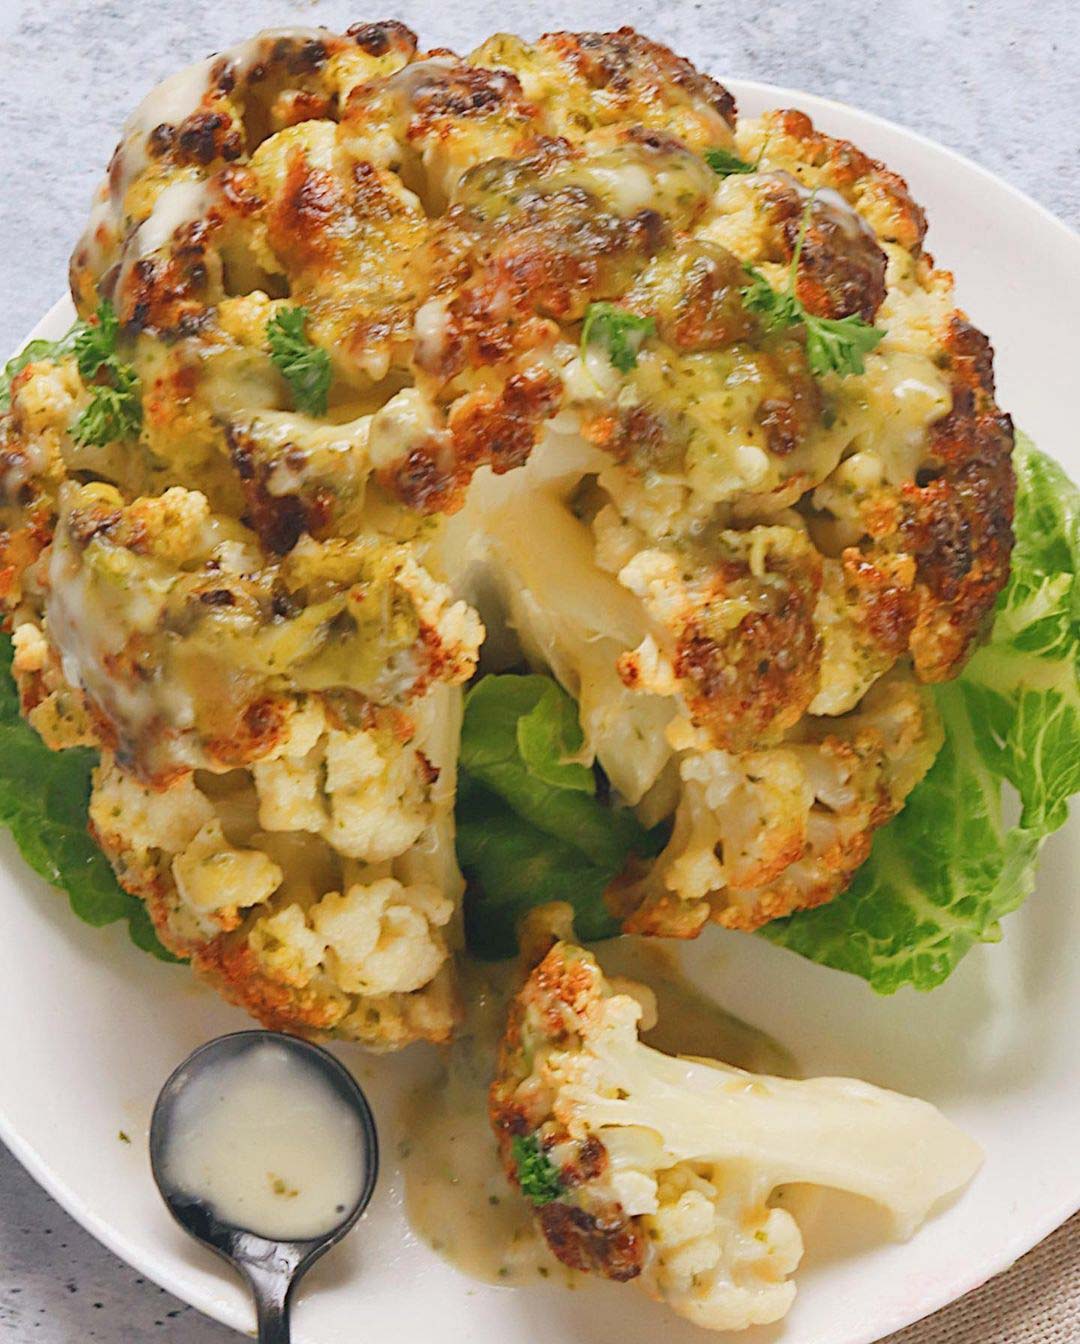 Whole Roasted Cauliflower with Cheesy Pesto served on a plate with spoon.